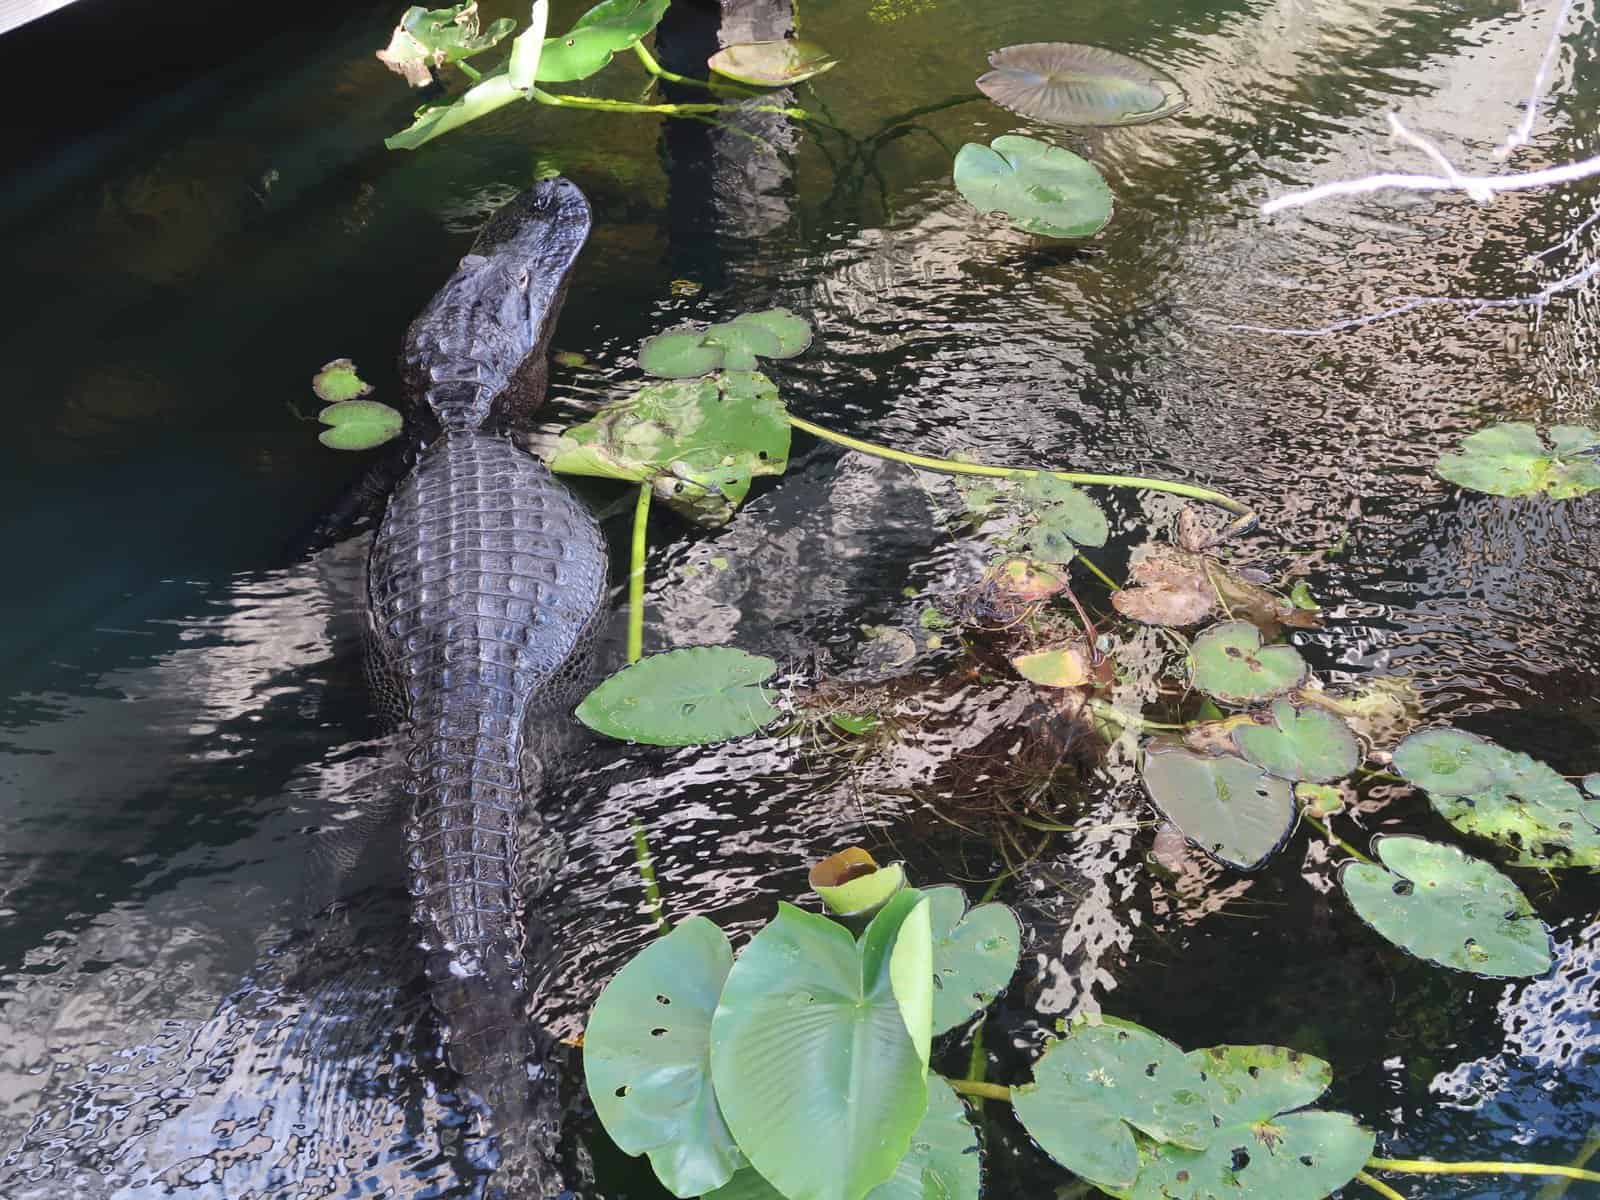 Encounter the Majestic Alligators and Crocodiles in the Florida Everglades National Park